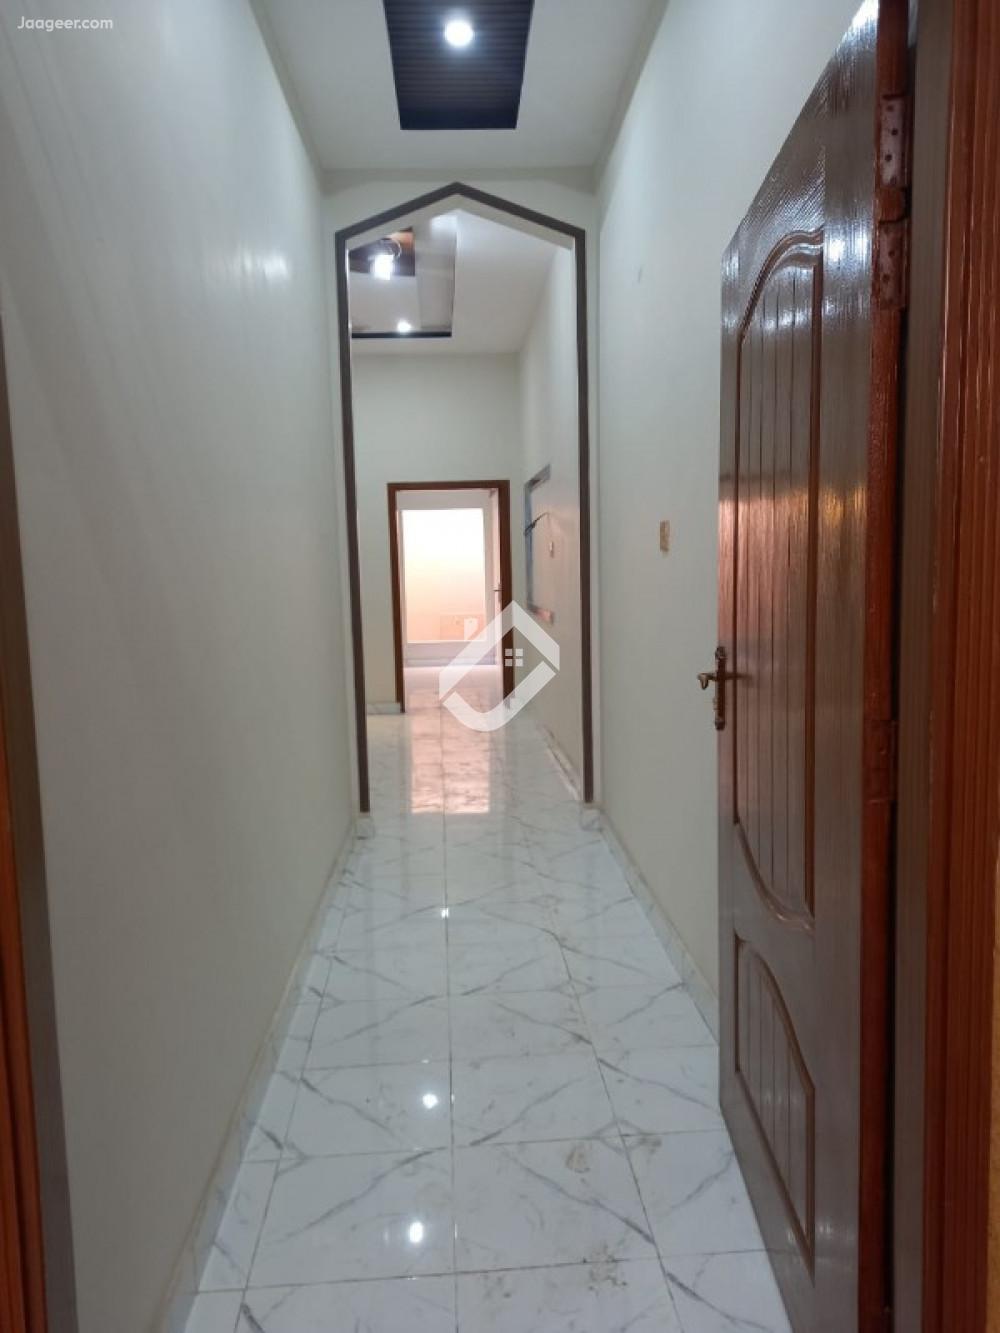 Main image 3 Marla Double Storey House For Sale In Shareef Town Shareef Town, Sargodha